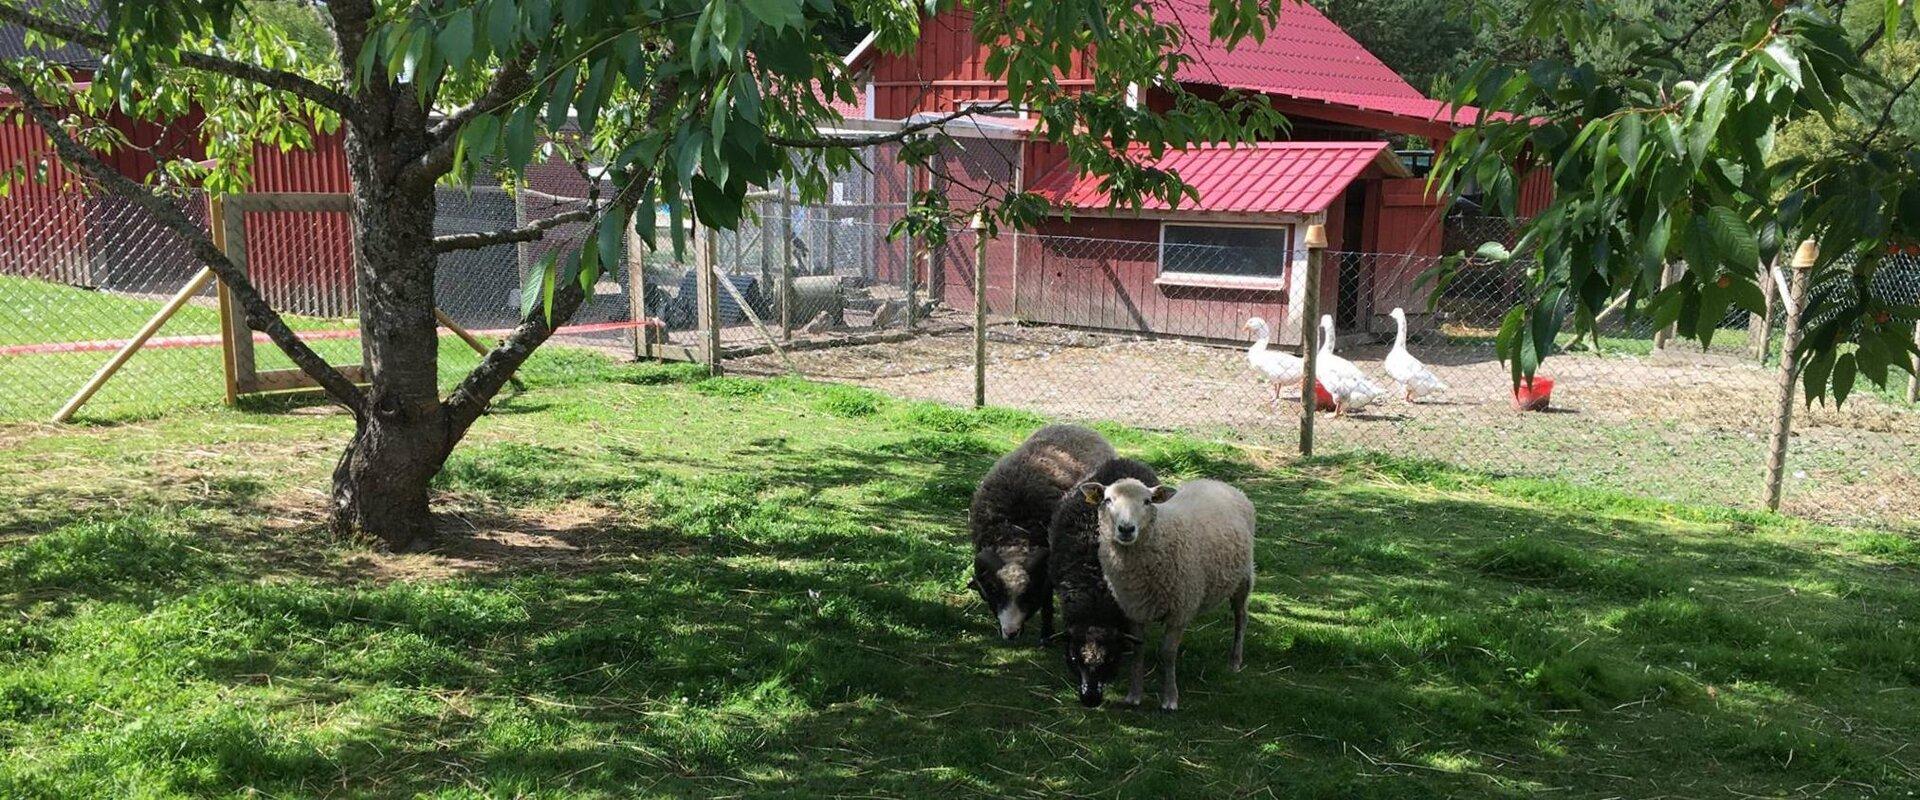 Teispere Farm is perfect for taking time out and breathing the countryside air while listening to the sound of running water and birds. The live park-